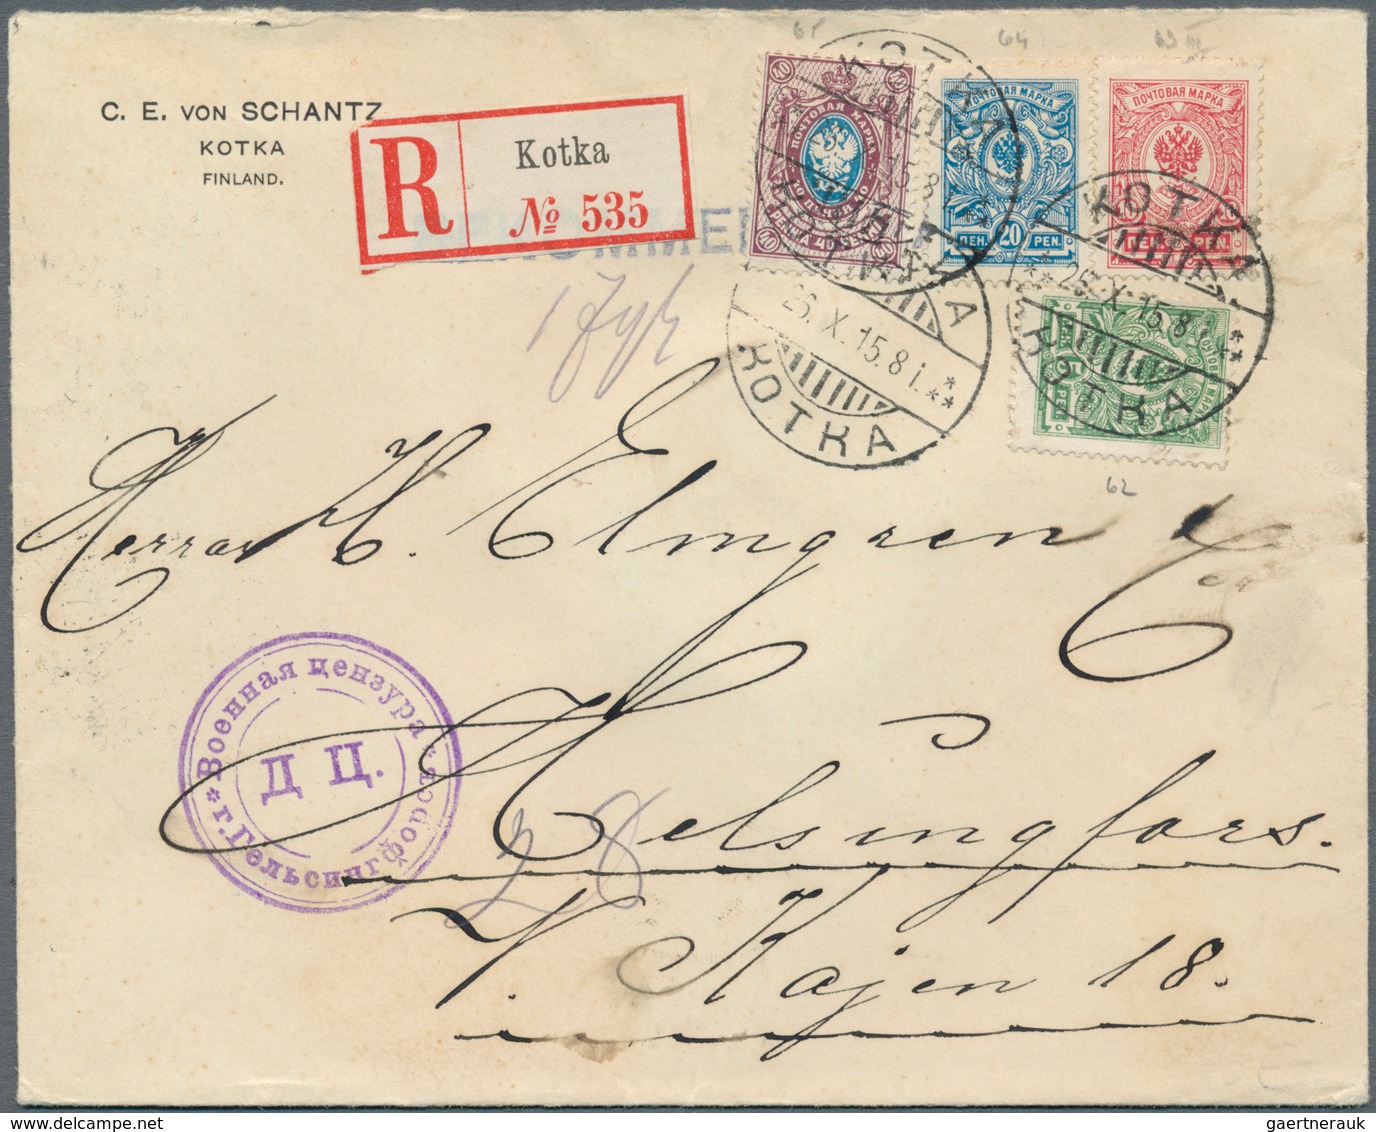 Finnland: 1856/1963, interesting lot of ca. 60 franked covers/postcards and postal stationery (unuse